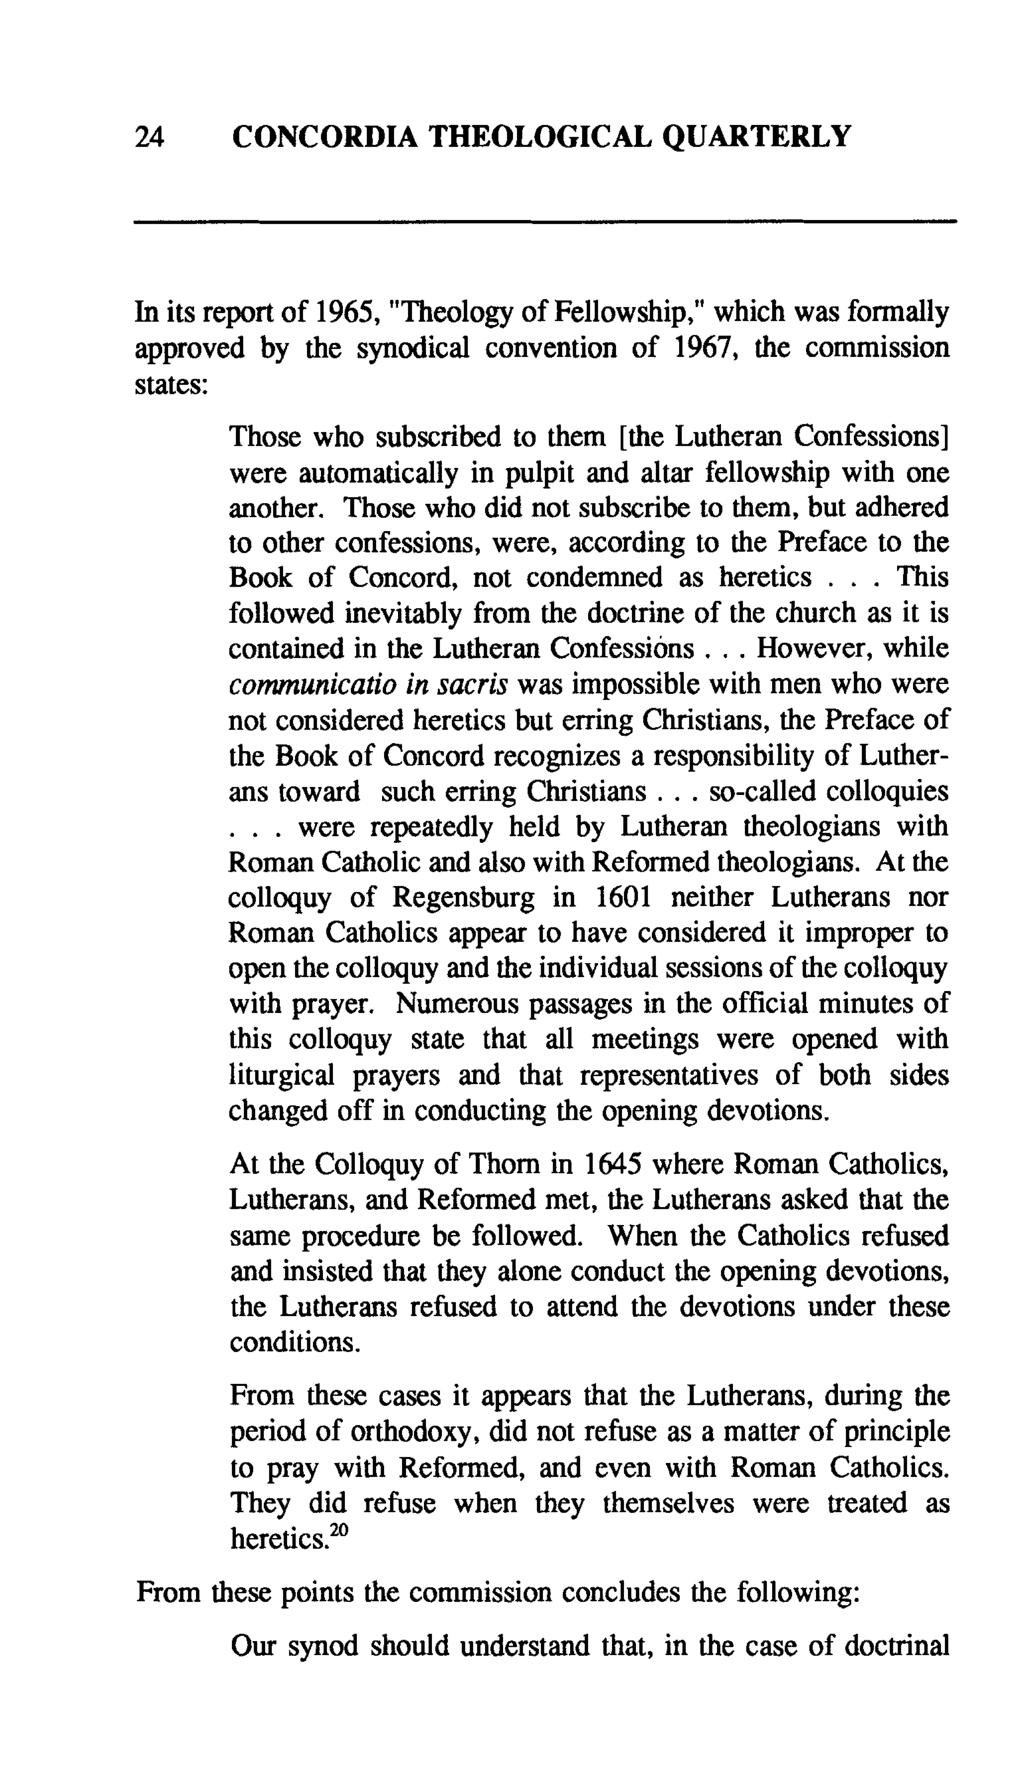 24 CONCORDIA THEOLOGICAL QUARTERLY In its report of 1965, "Theology of Fellowship," which was formally approved by the synodical convention of 1967, the commission states: Those who subscribed to